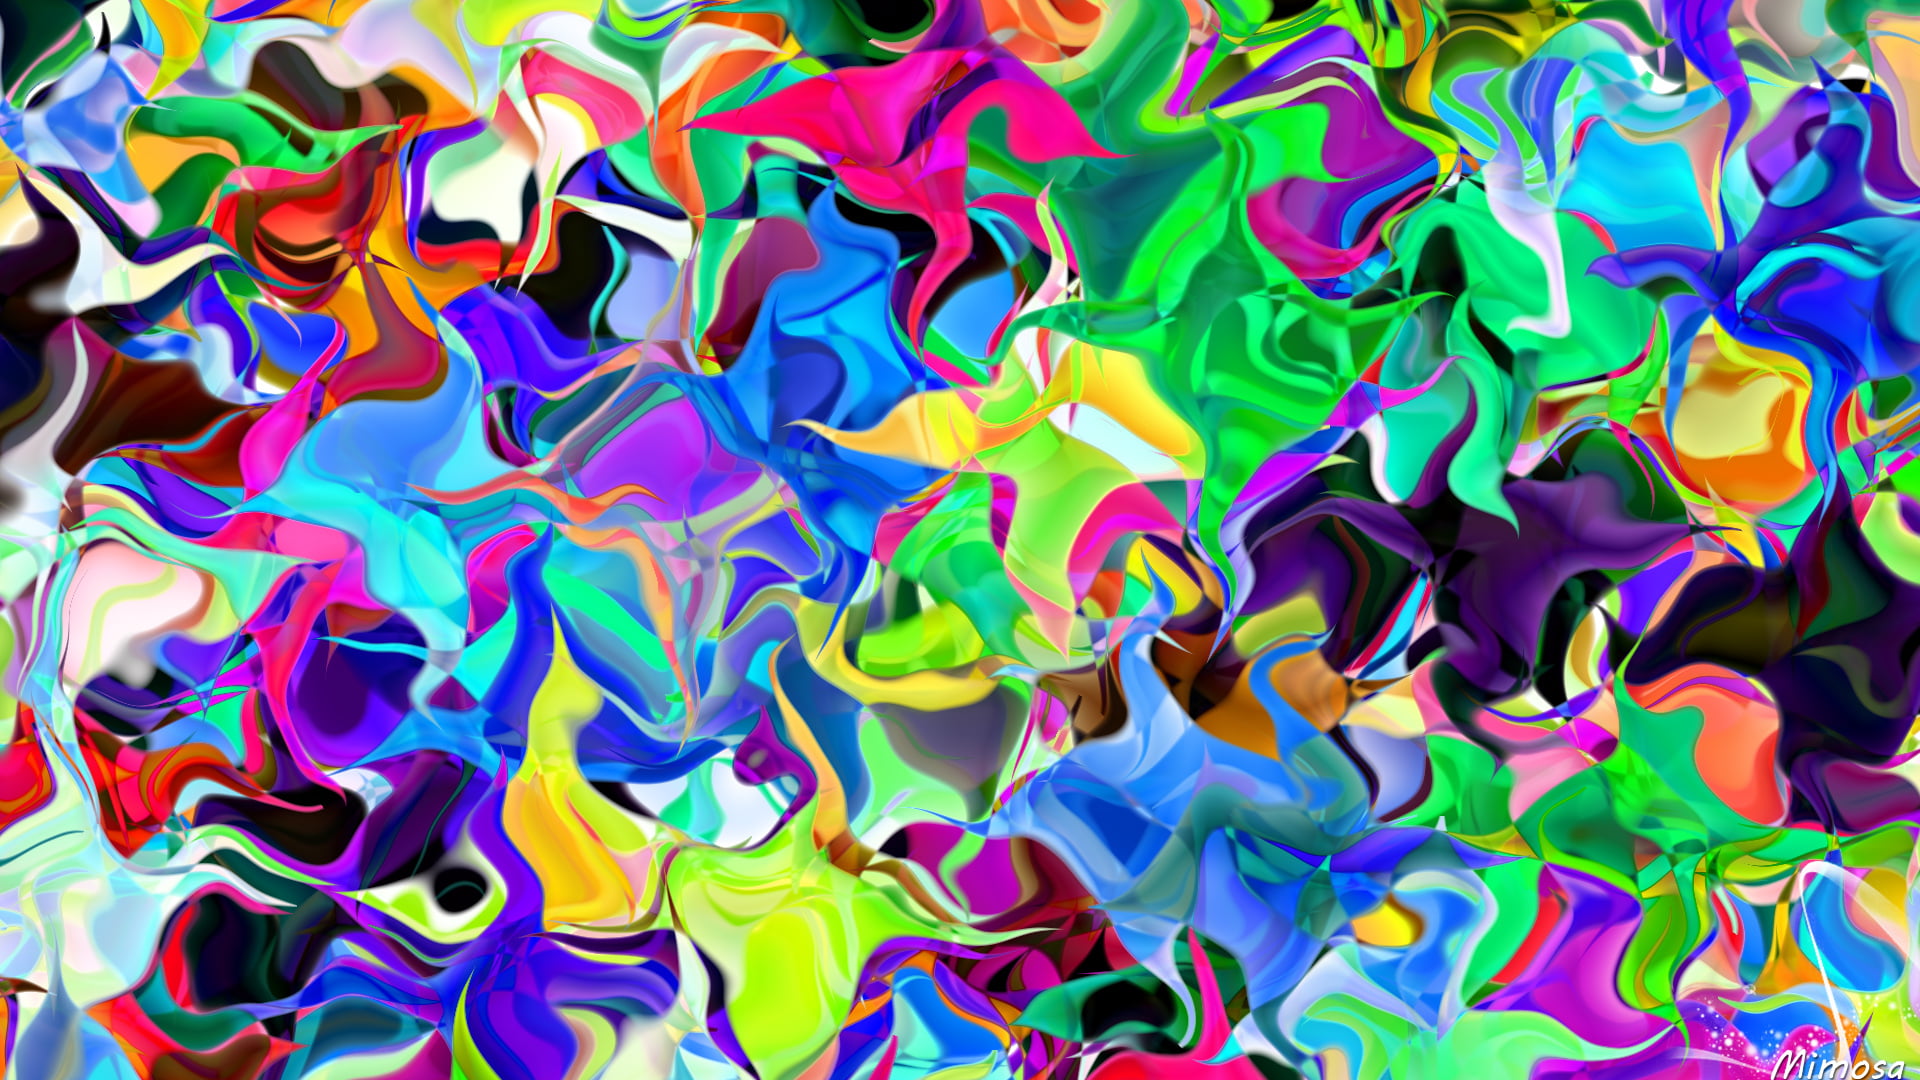 Abstract, Colors, Colorful, Digital Art, Distortion, Ripple